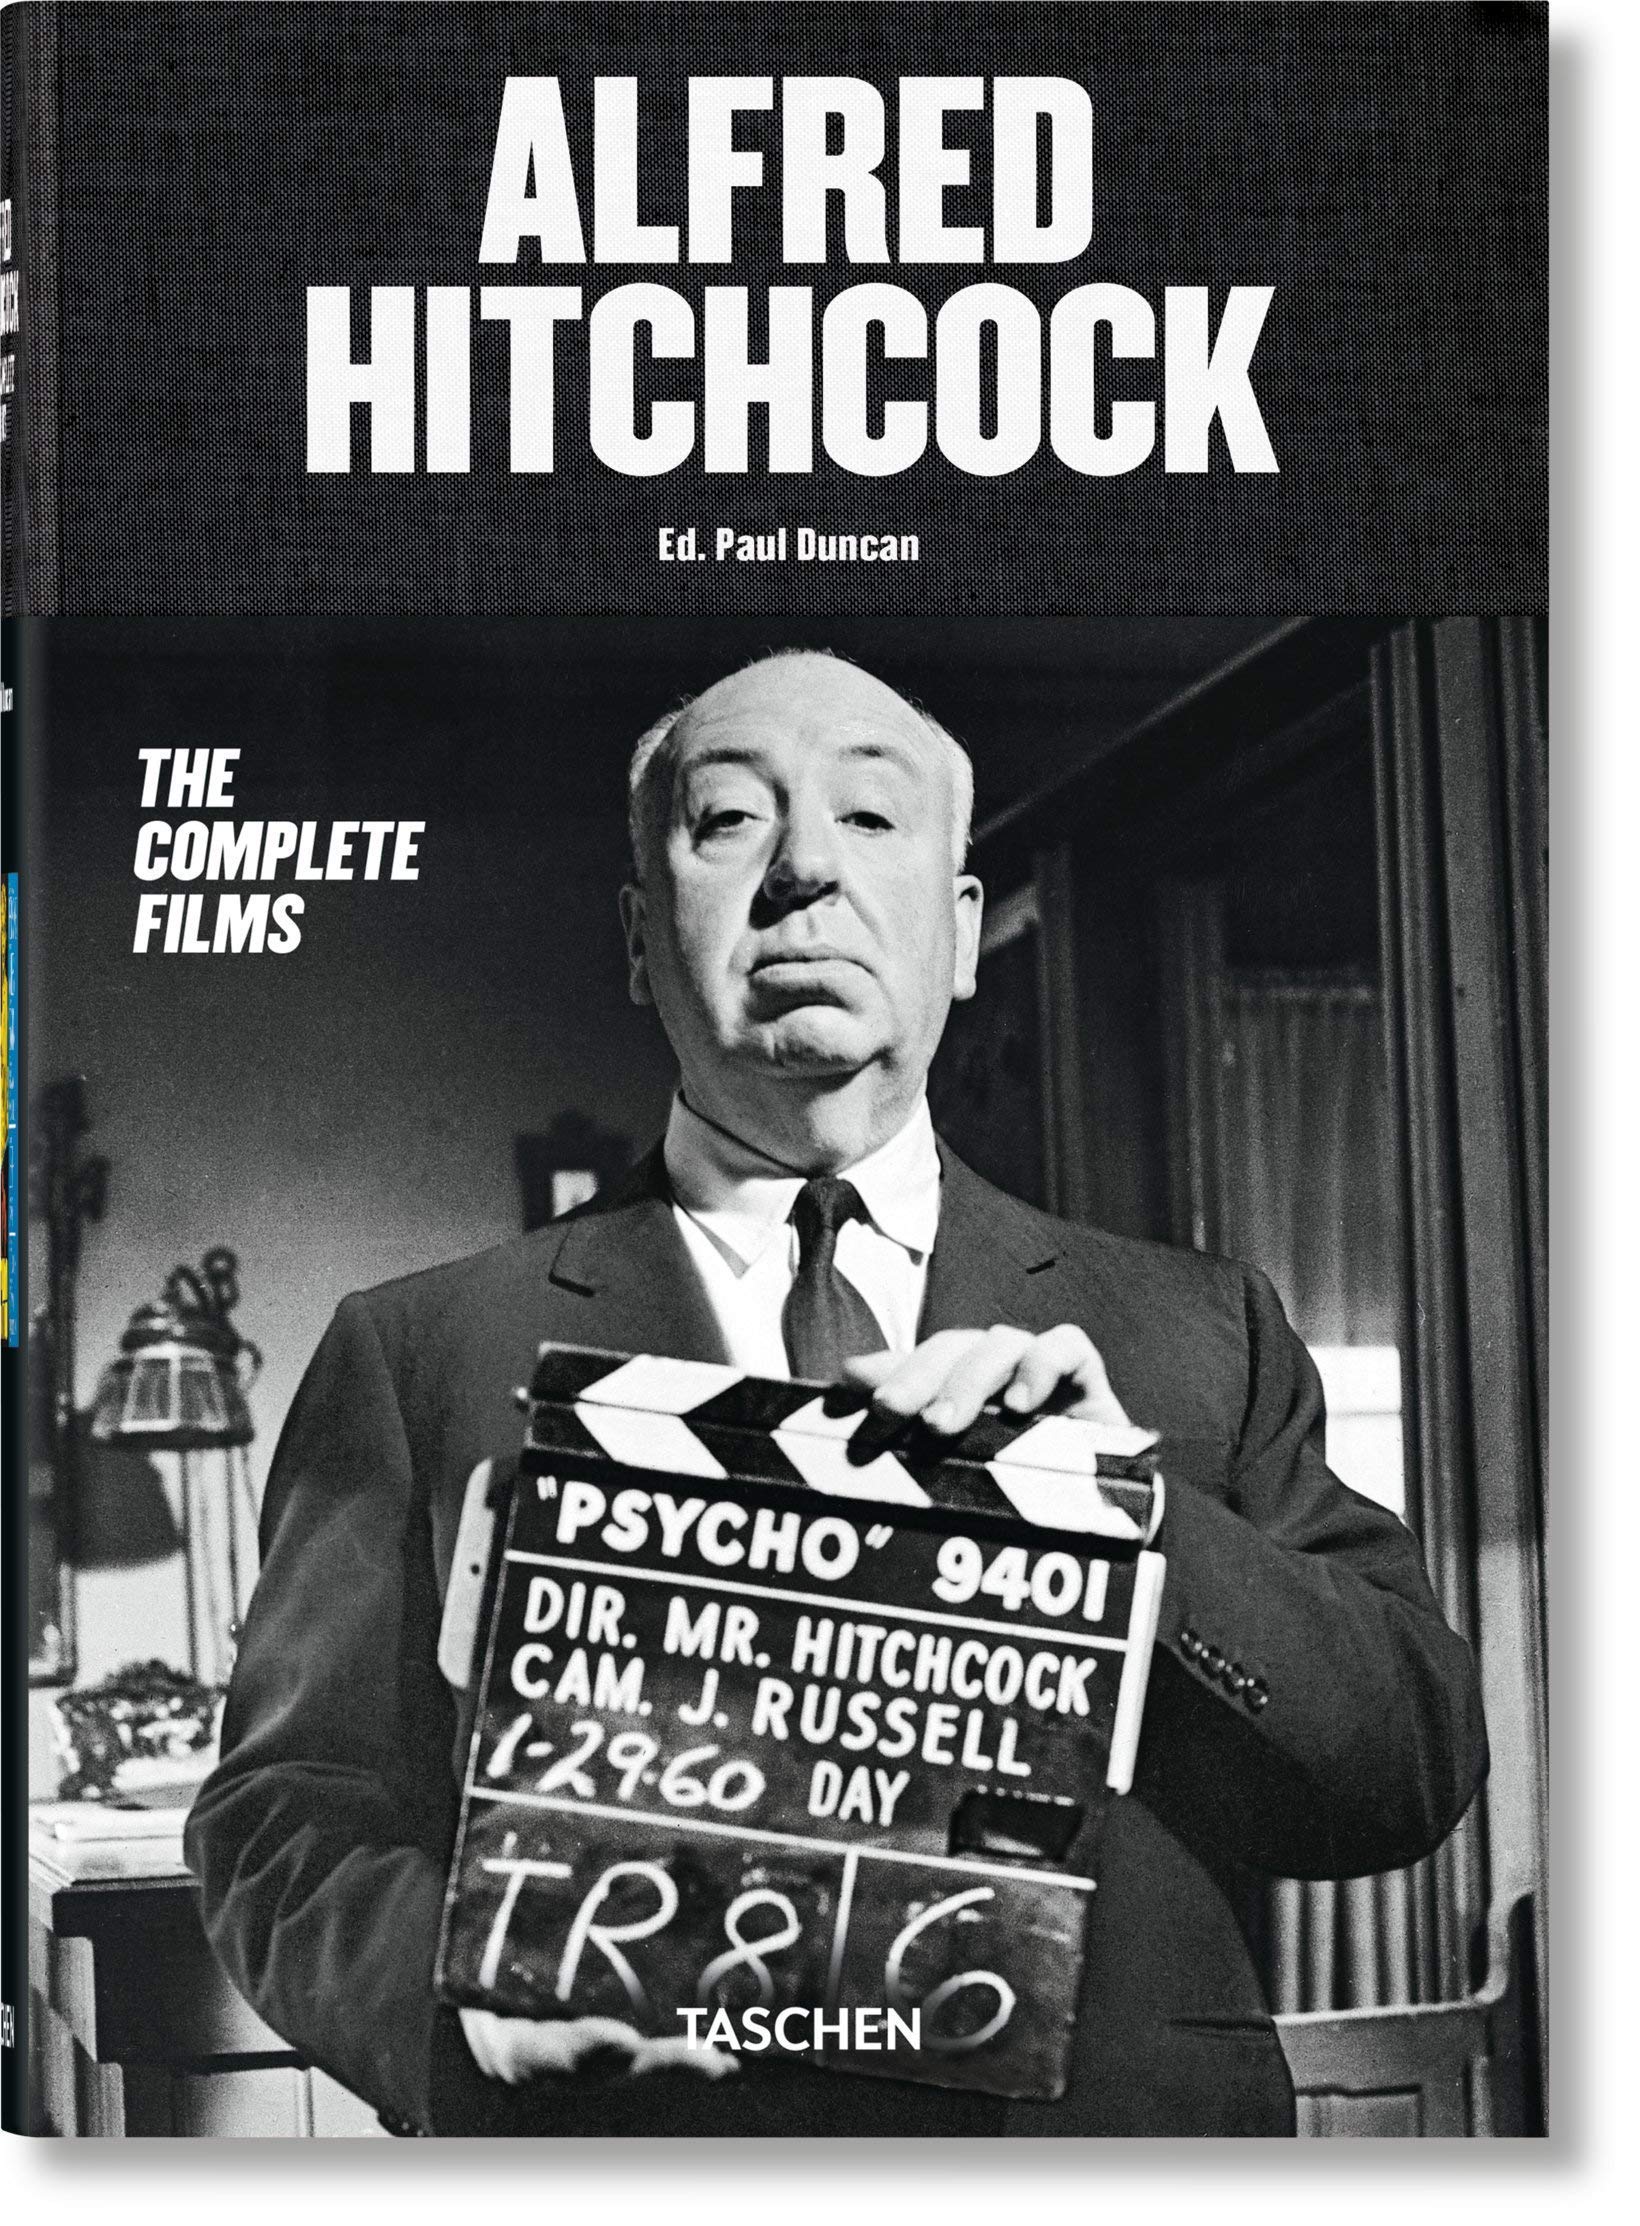 Paul Duncan - Alfred Hitchcock: The Complete Films